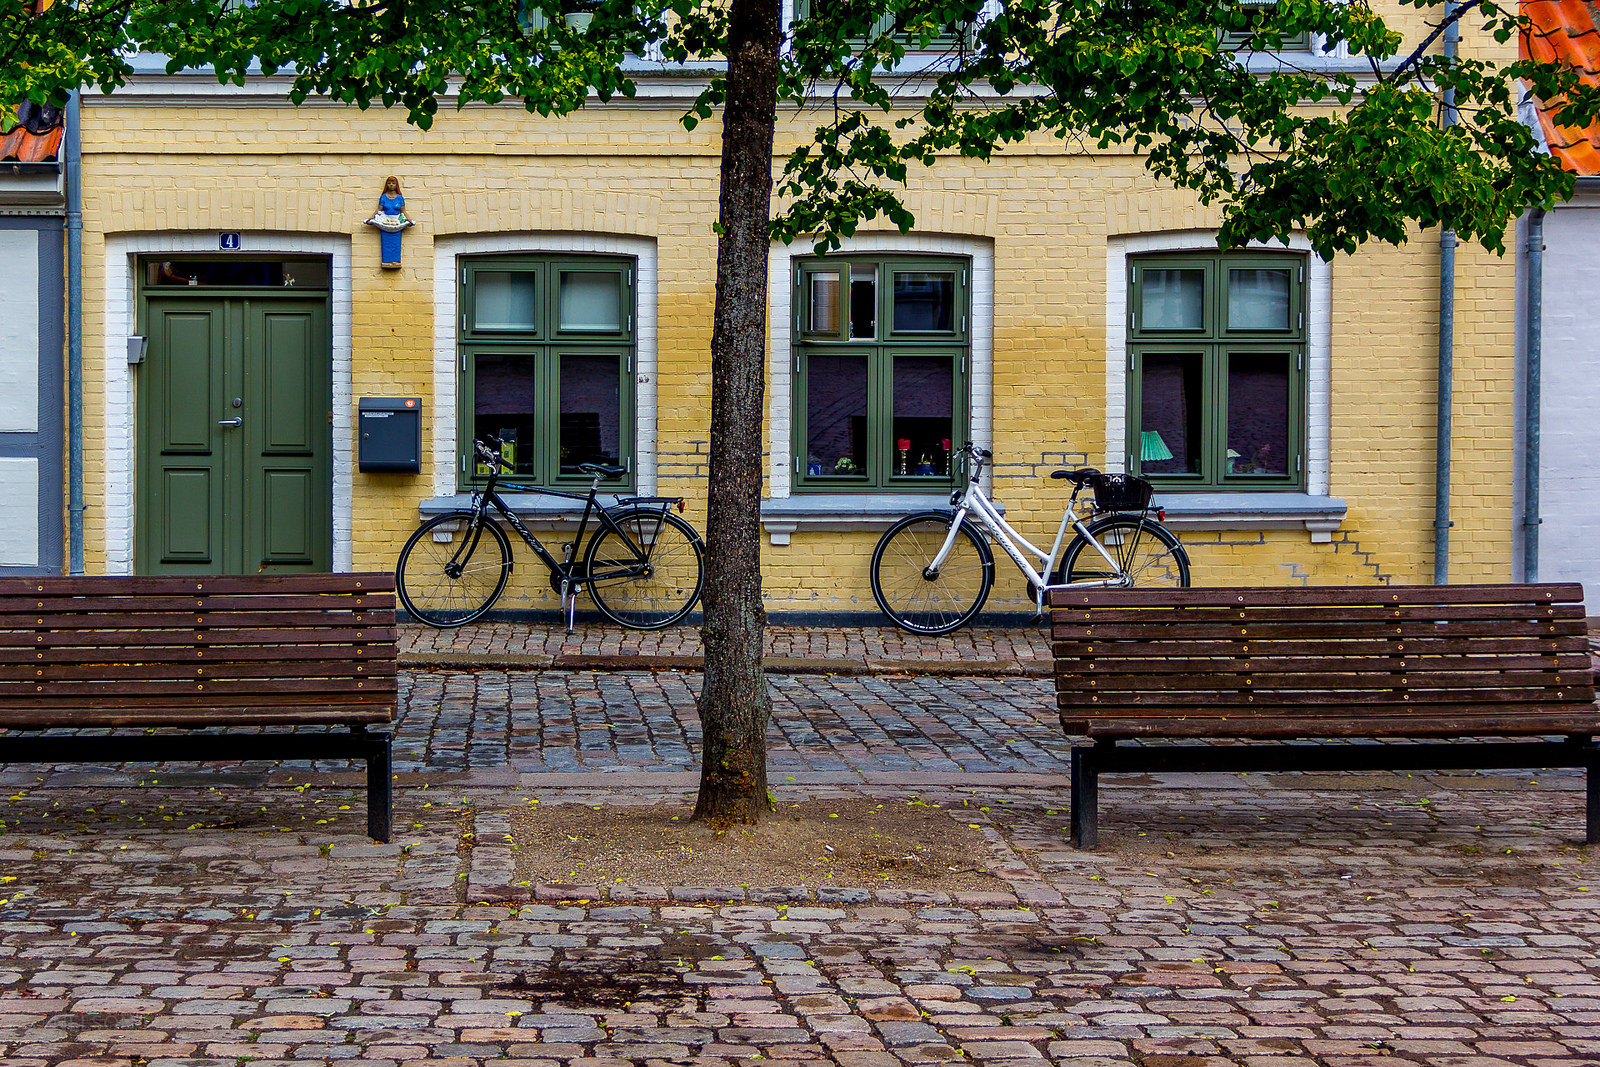 Quiet Odense street scene, with bicycles and a cheery house front, something to see during one day in Odense Denmark.